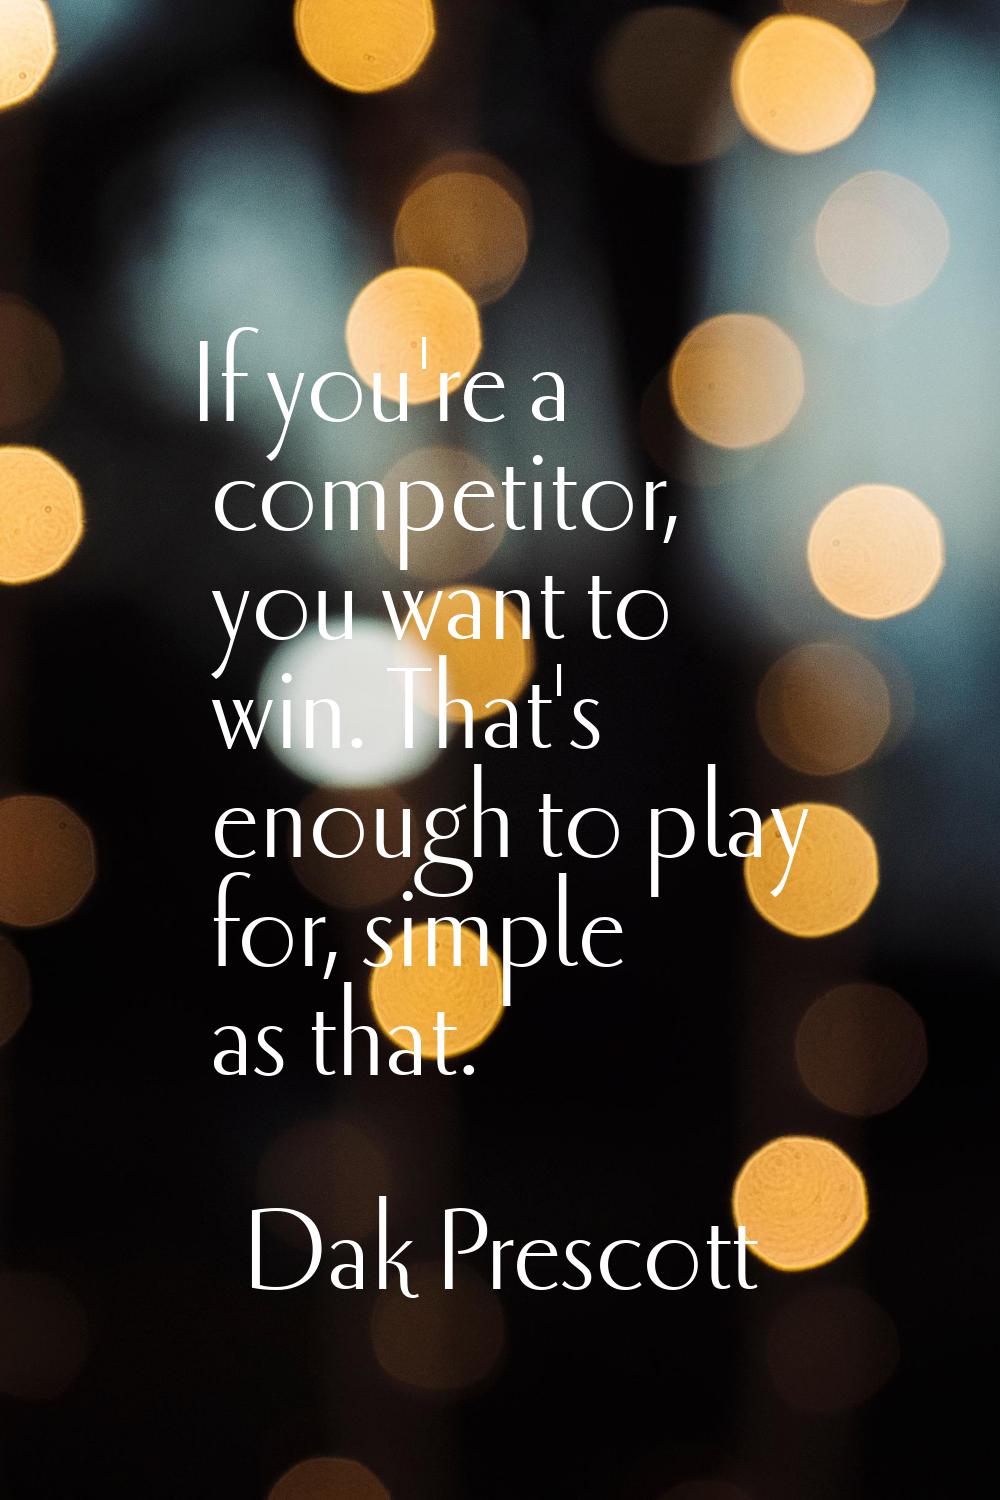 If you're a competitor, you want to win. That's enough to play for, simple as that.